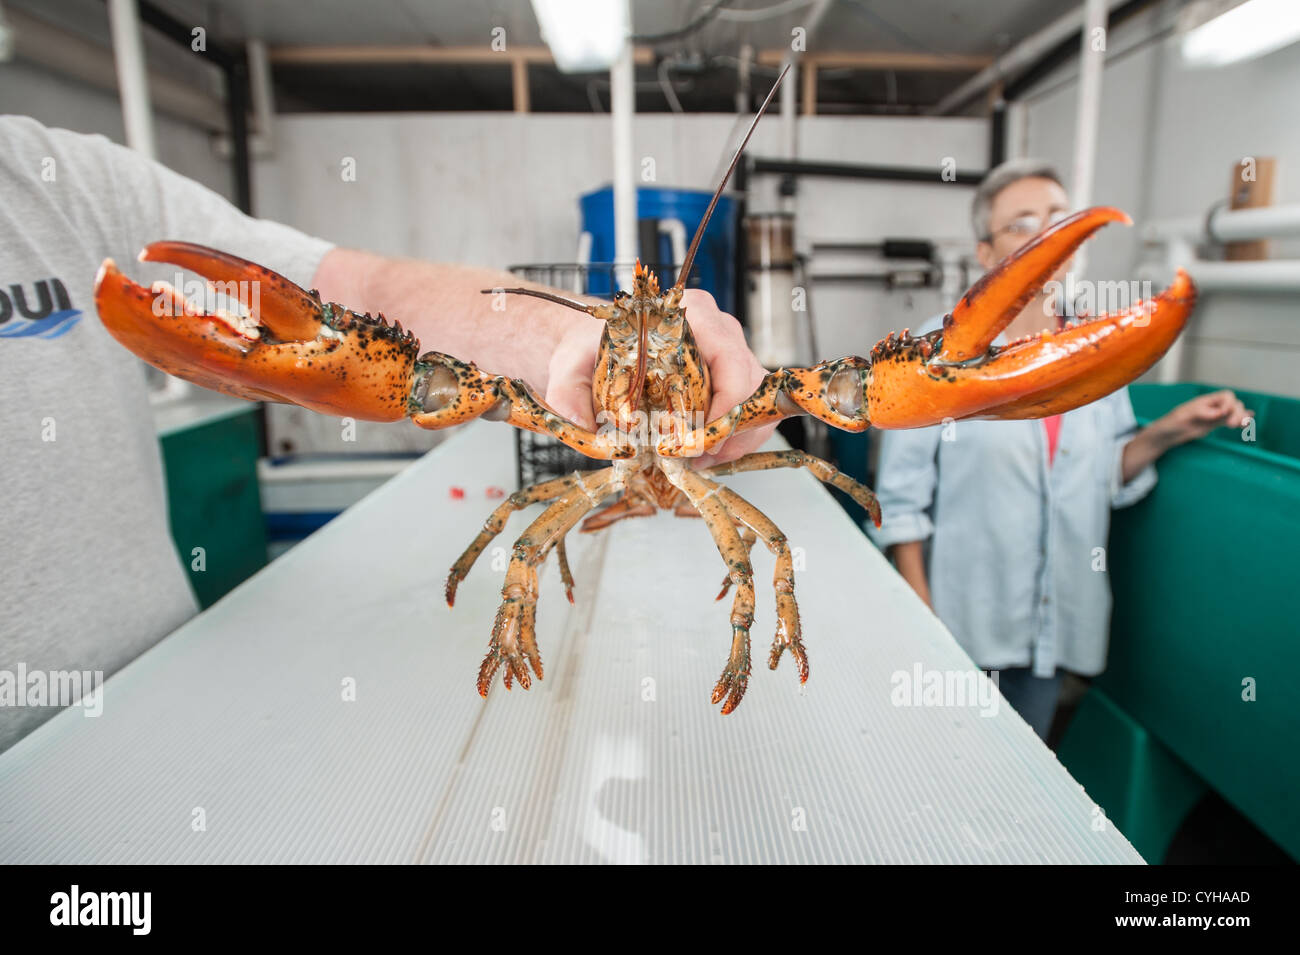 Scientist's hand holding a lobster in aquatic research lab Stock Photo